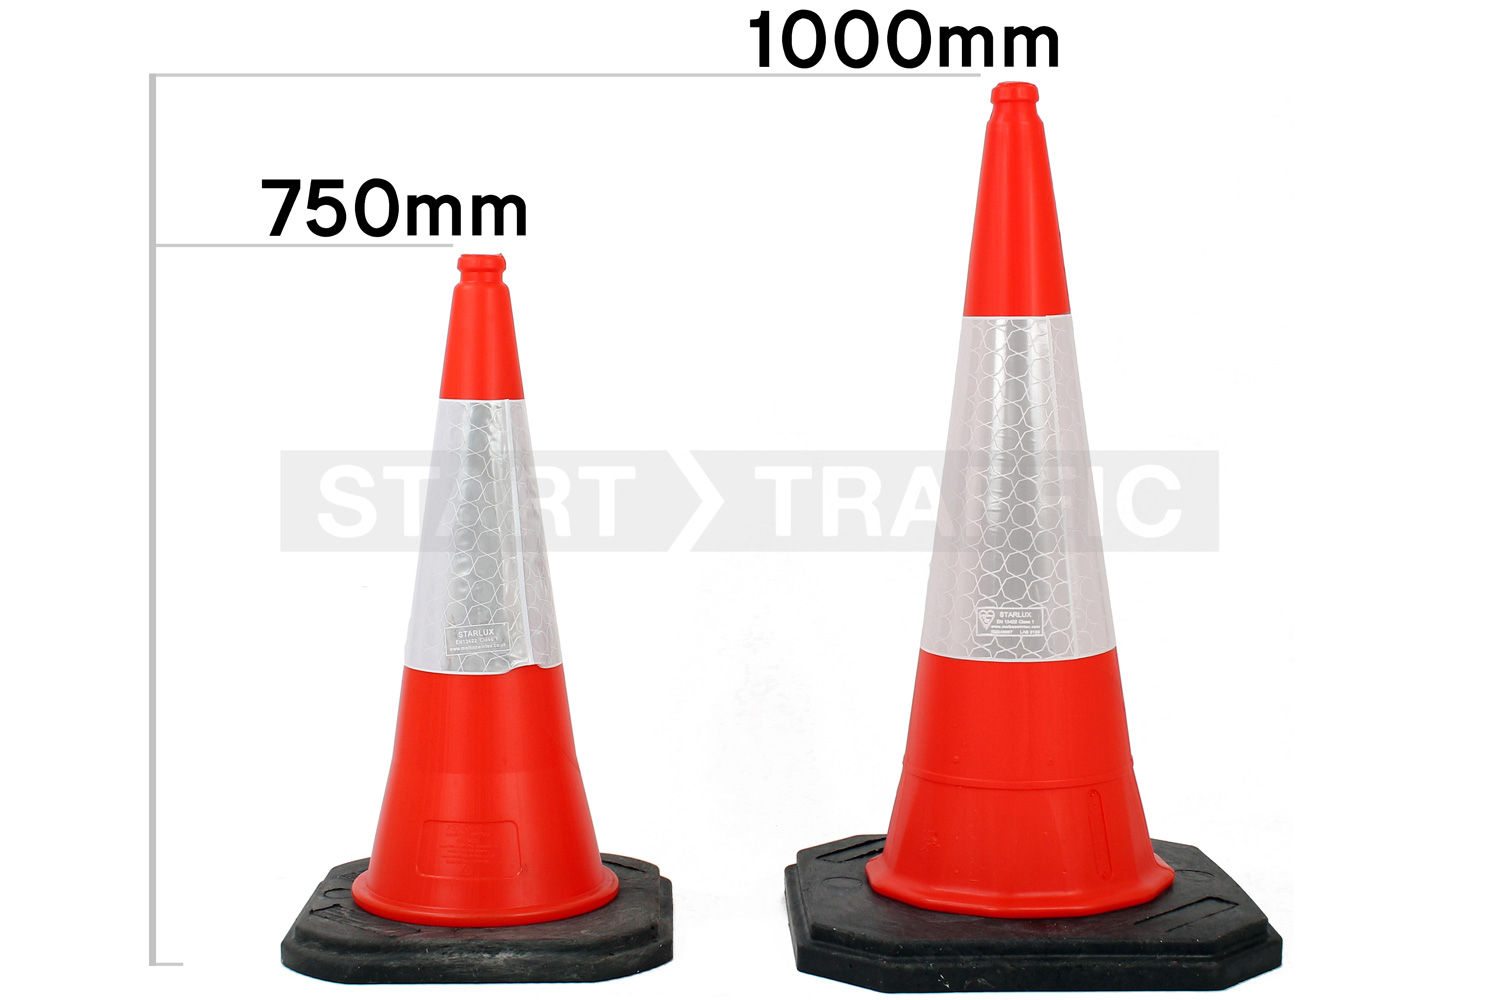 Suitable cone sizes shown